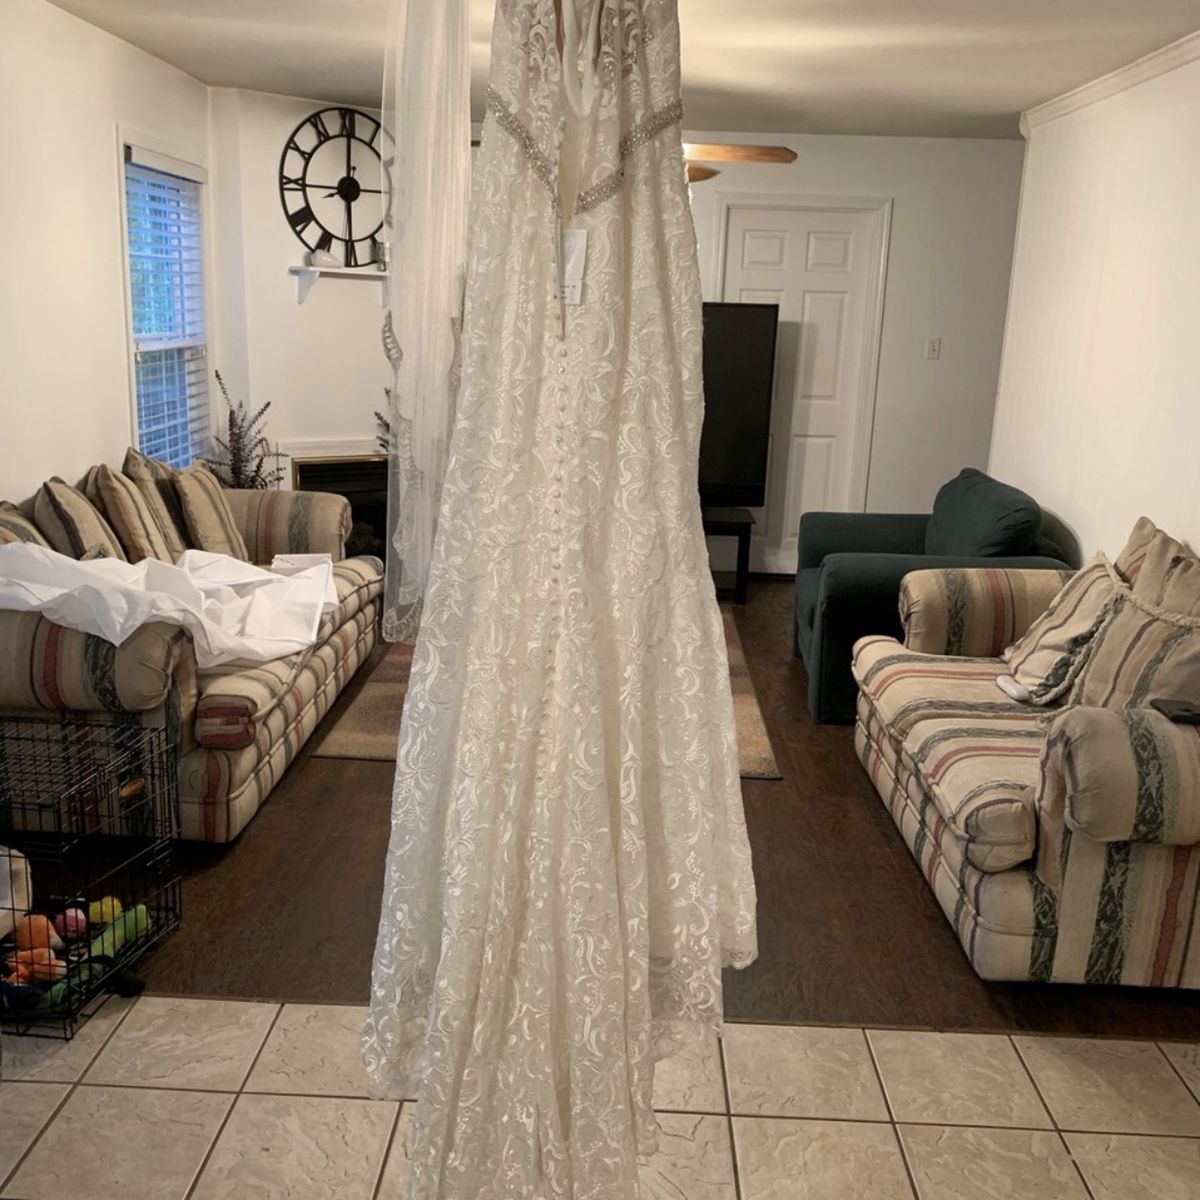 Size 14 White Dress With Train on Queenly